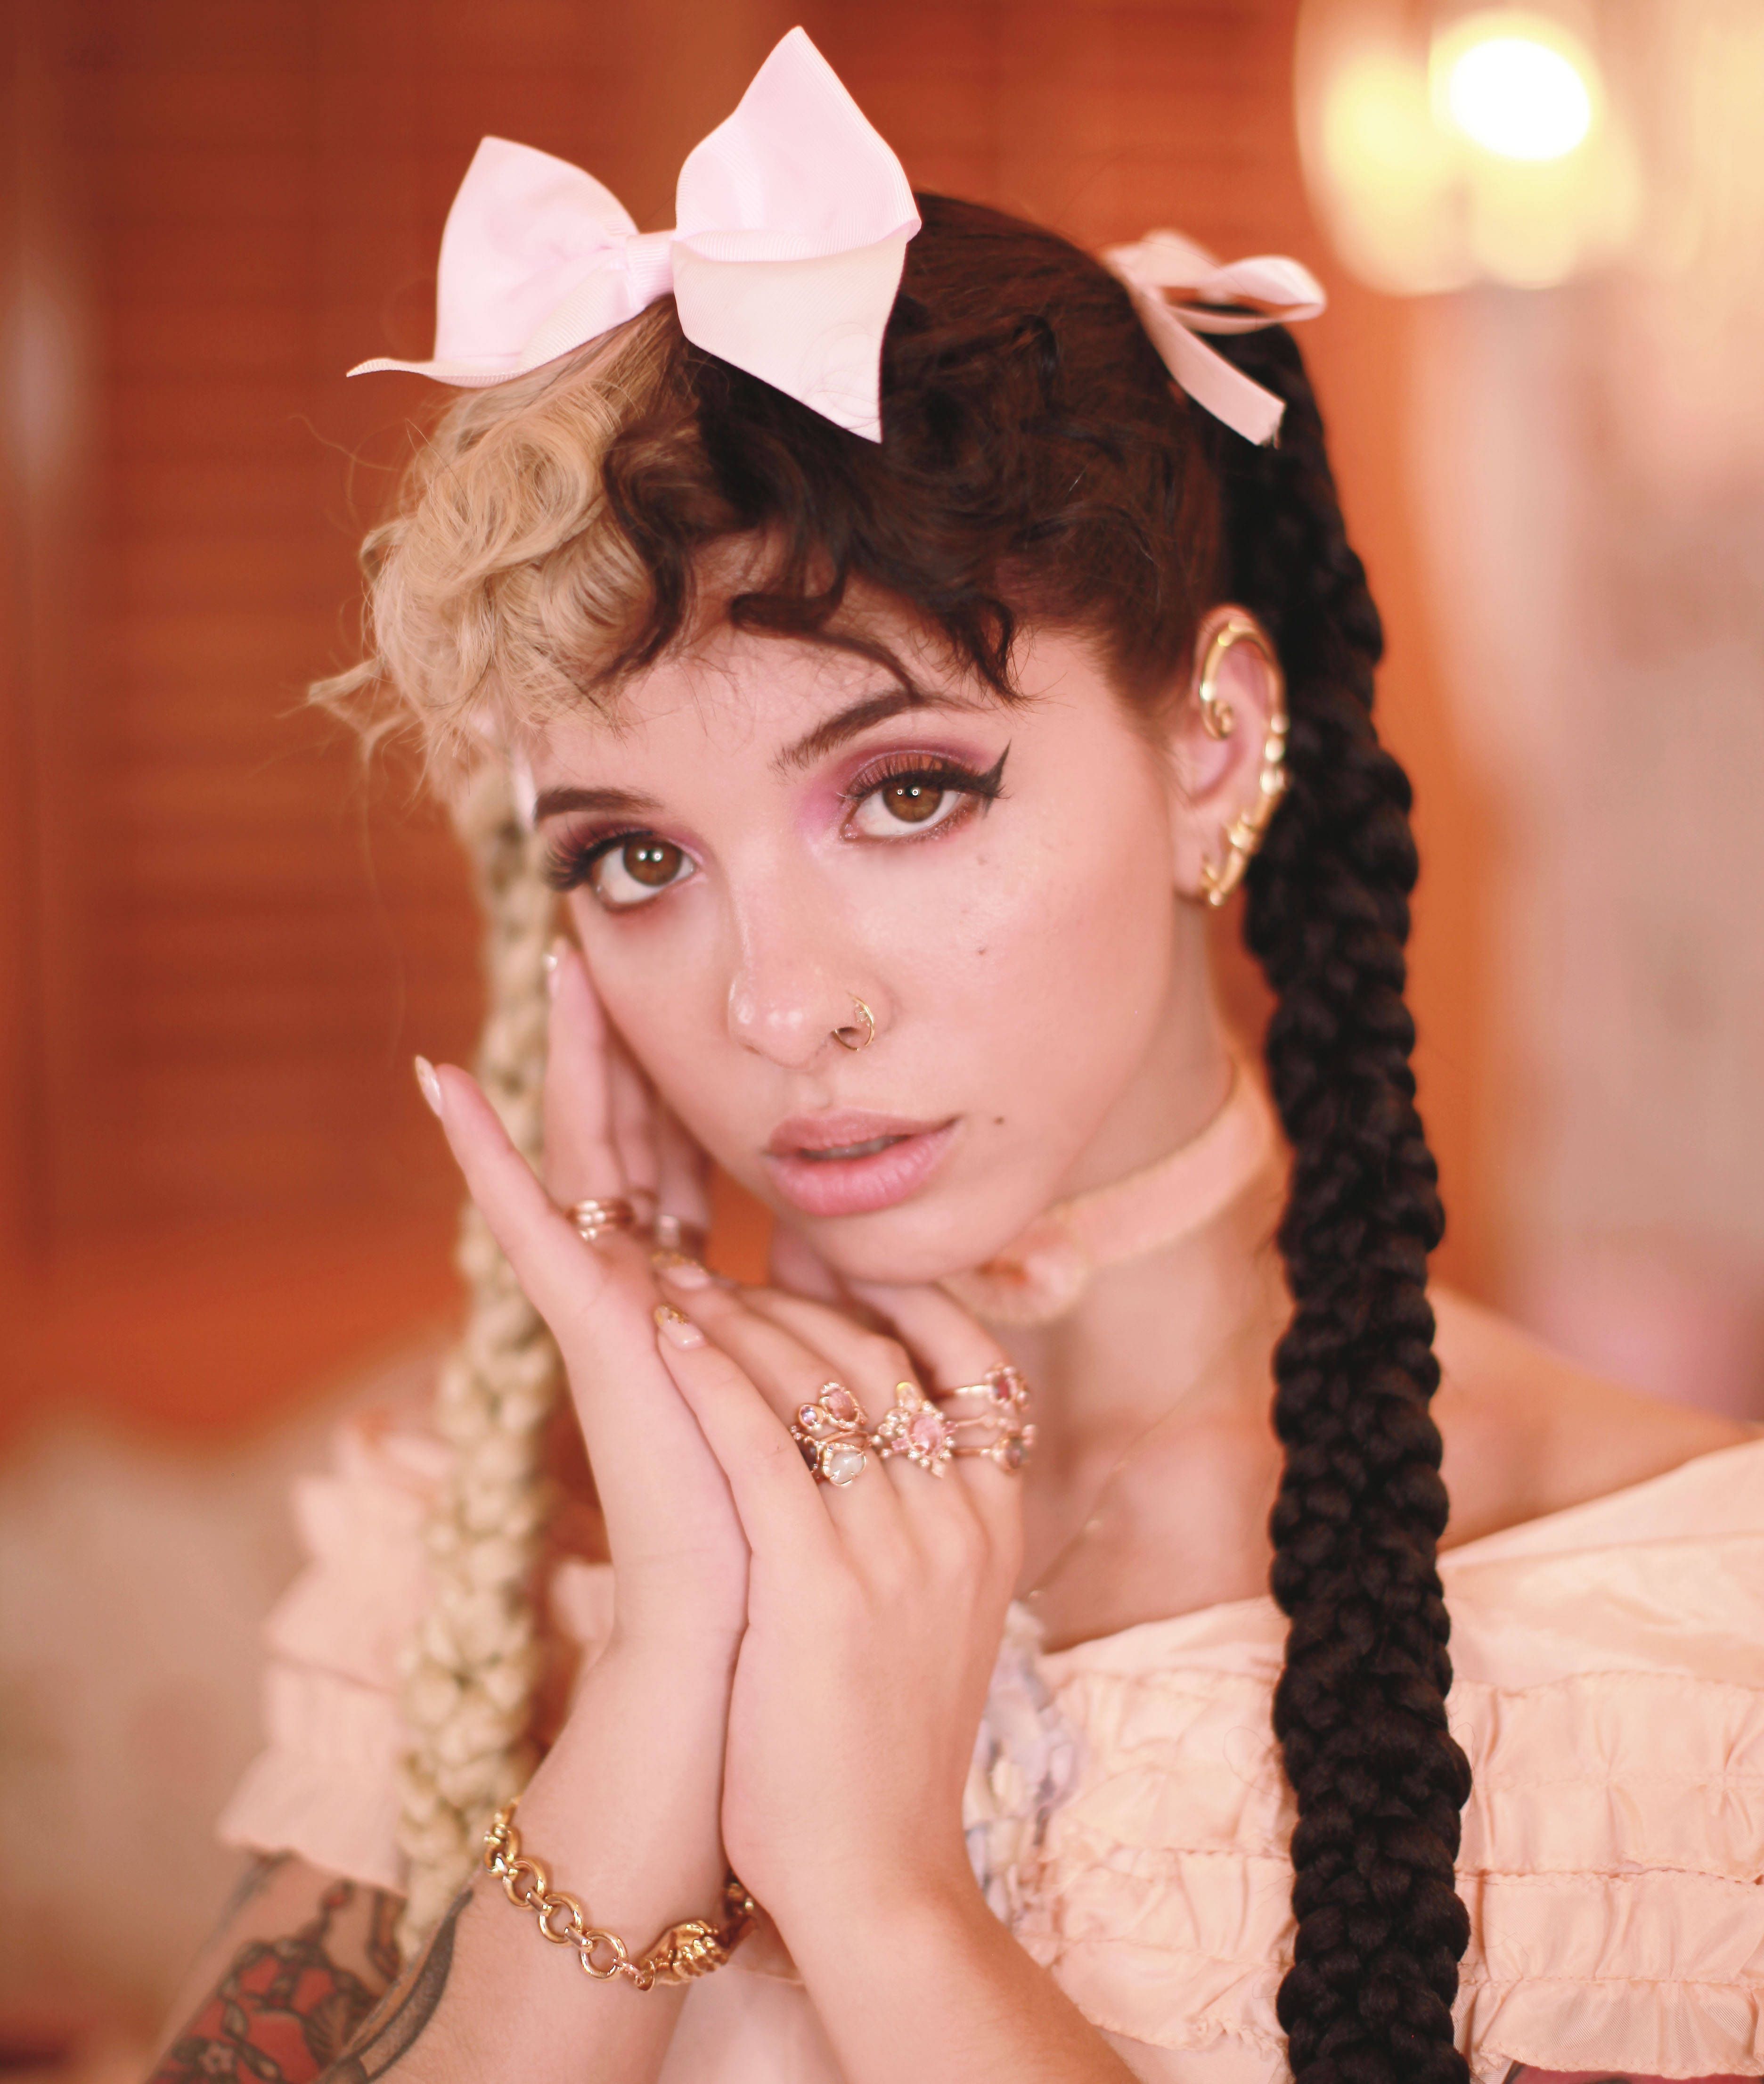 The 24-year-old musician is a mixed-race woman with light brown skin and dark brown hair. - Melanie Martinez